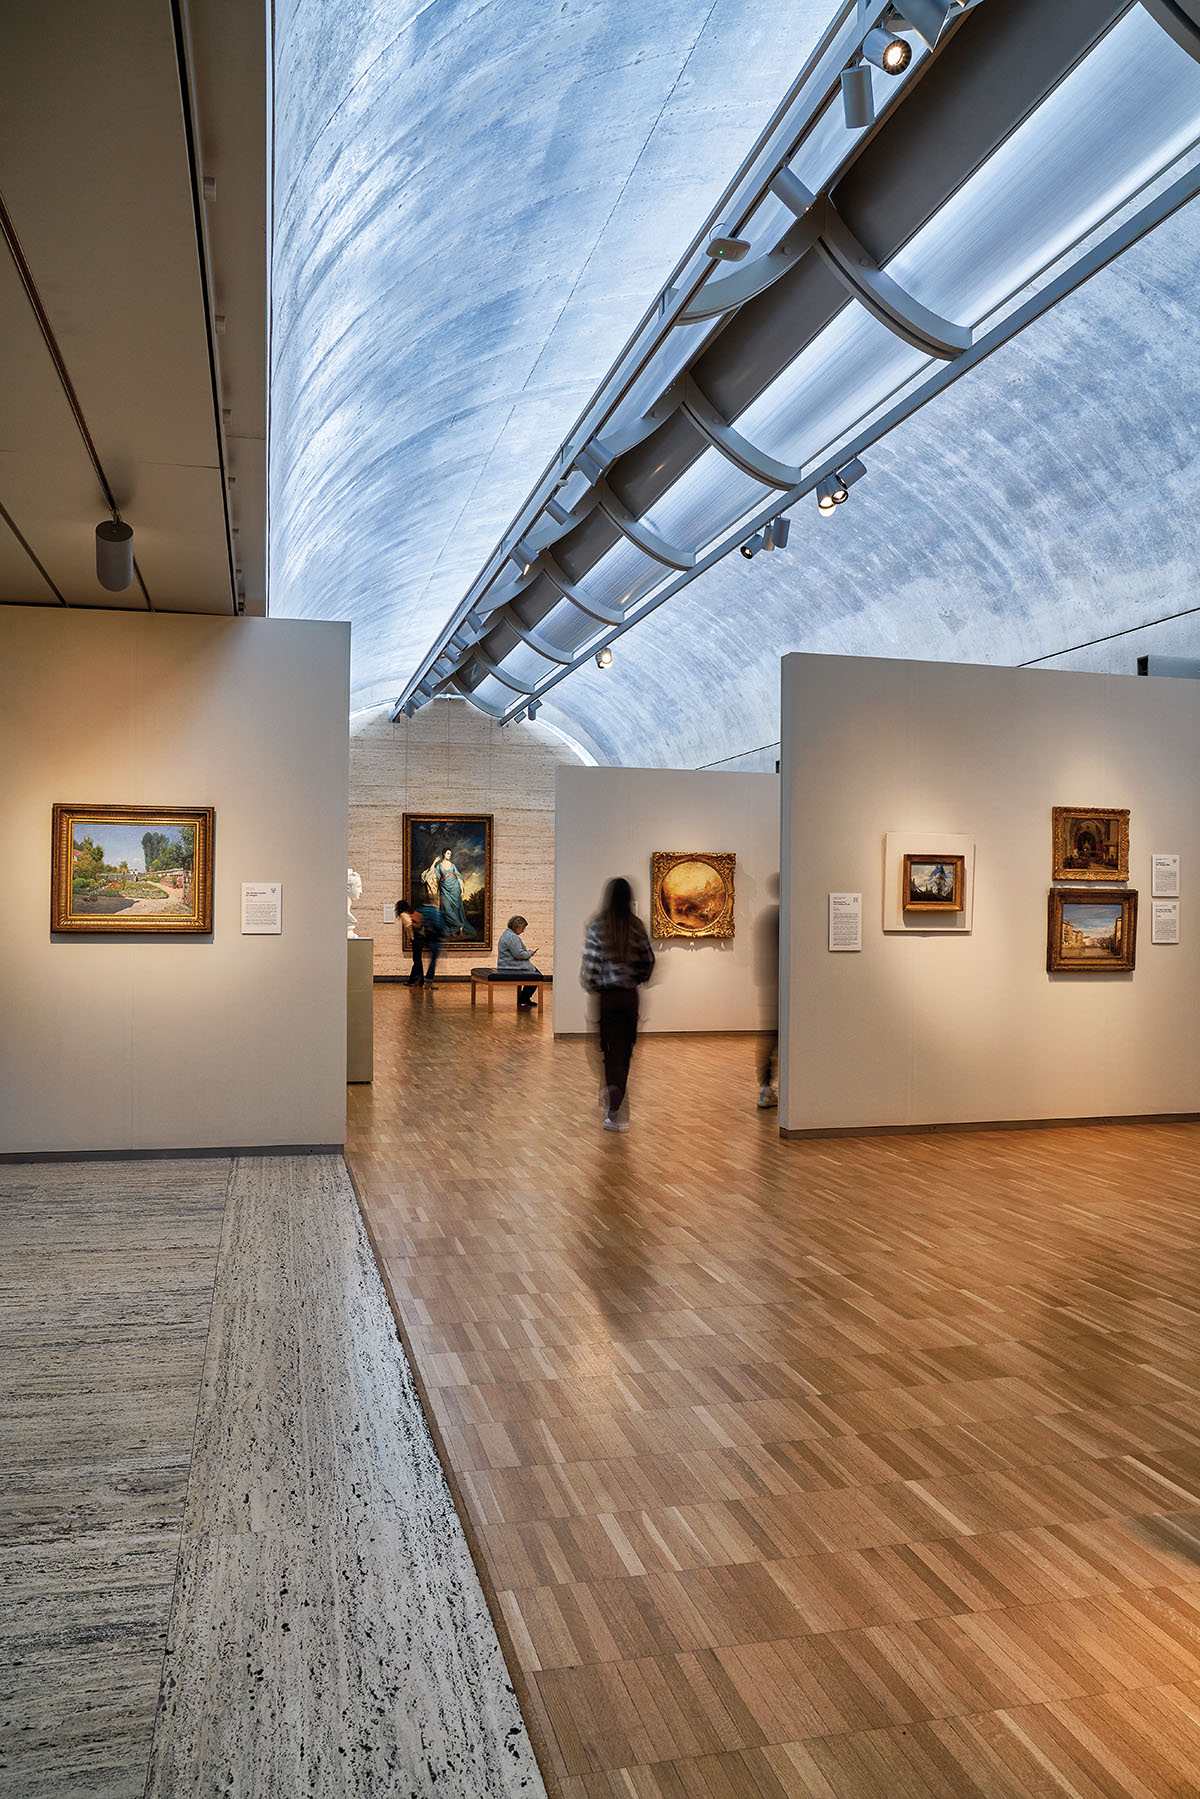 A blurred figure walks between several walls in a gallery with a diffused skylight overhead